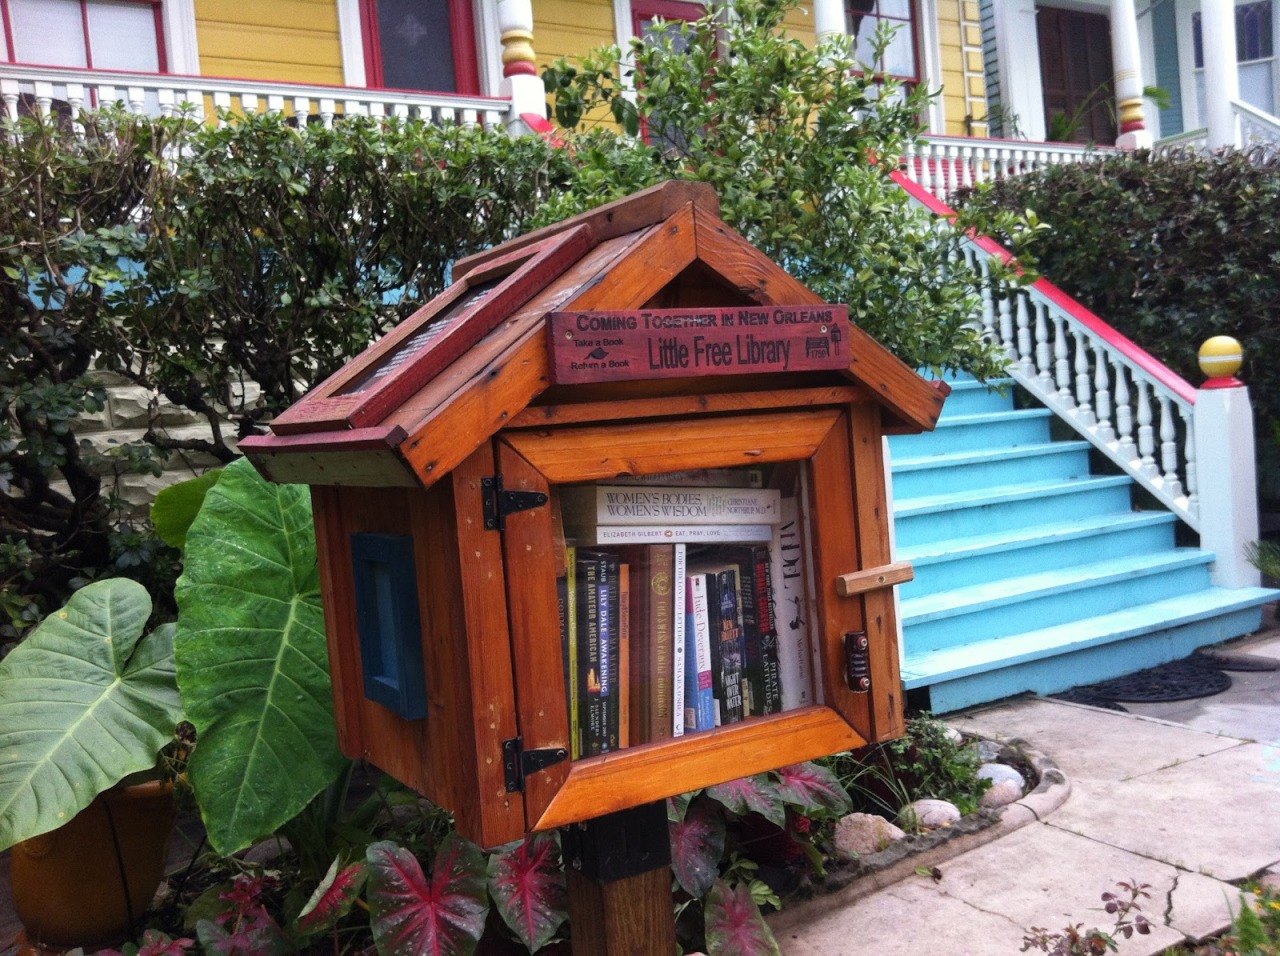 Little Free Library, New Orleans, Louisiana